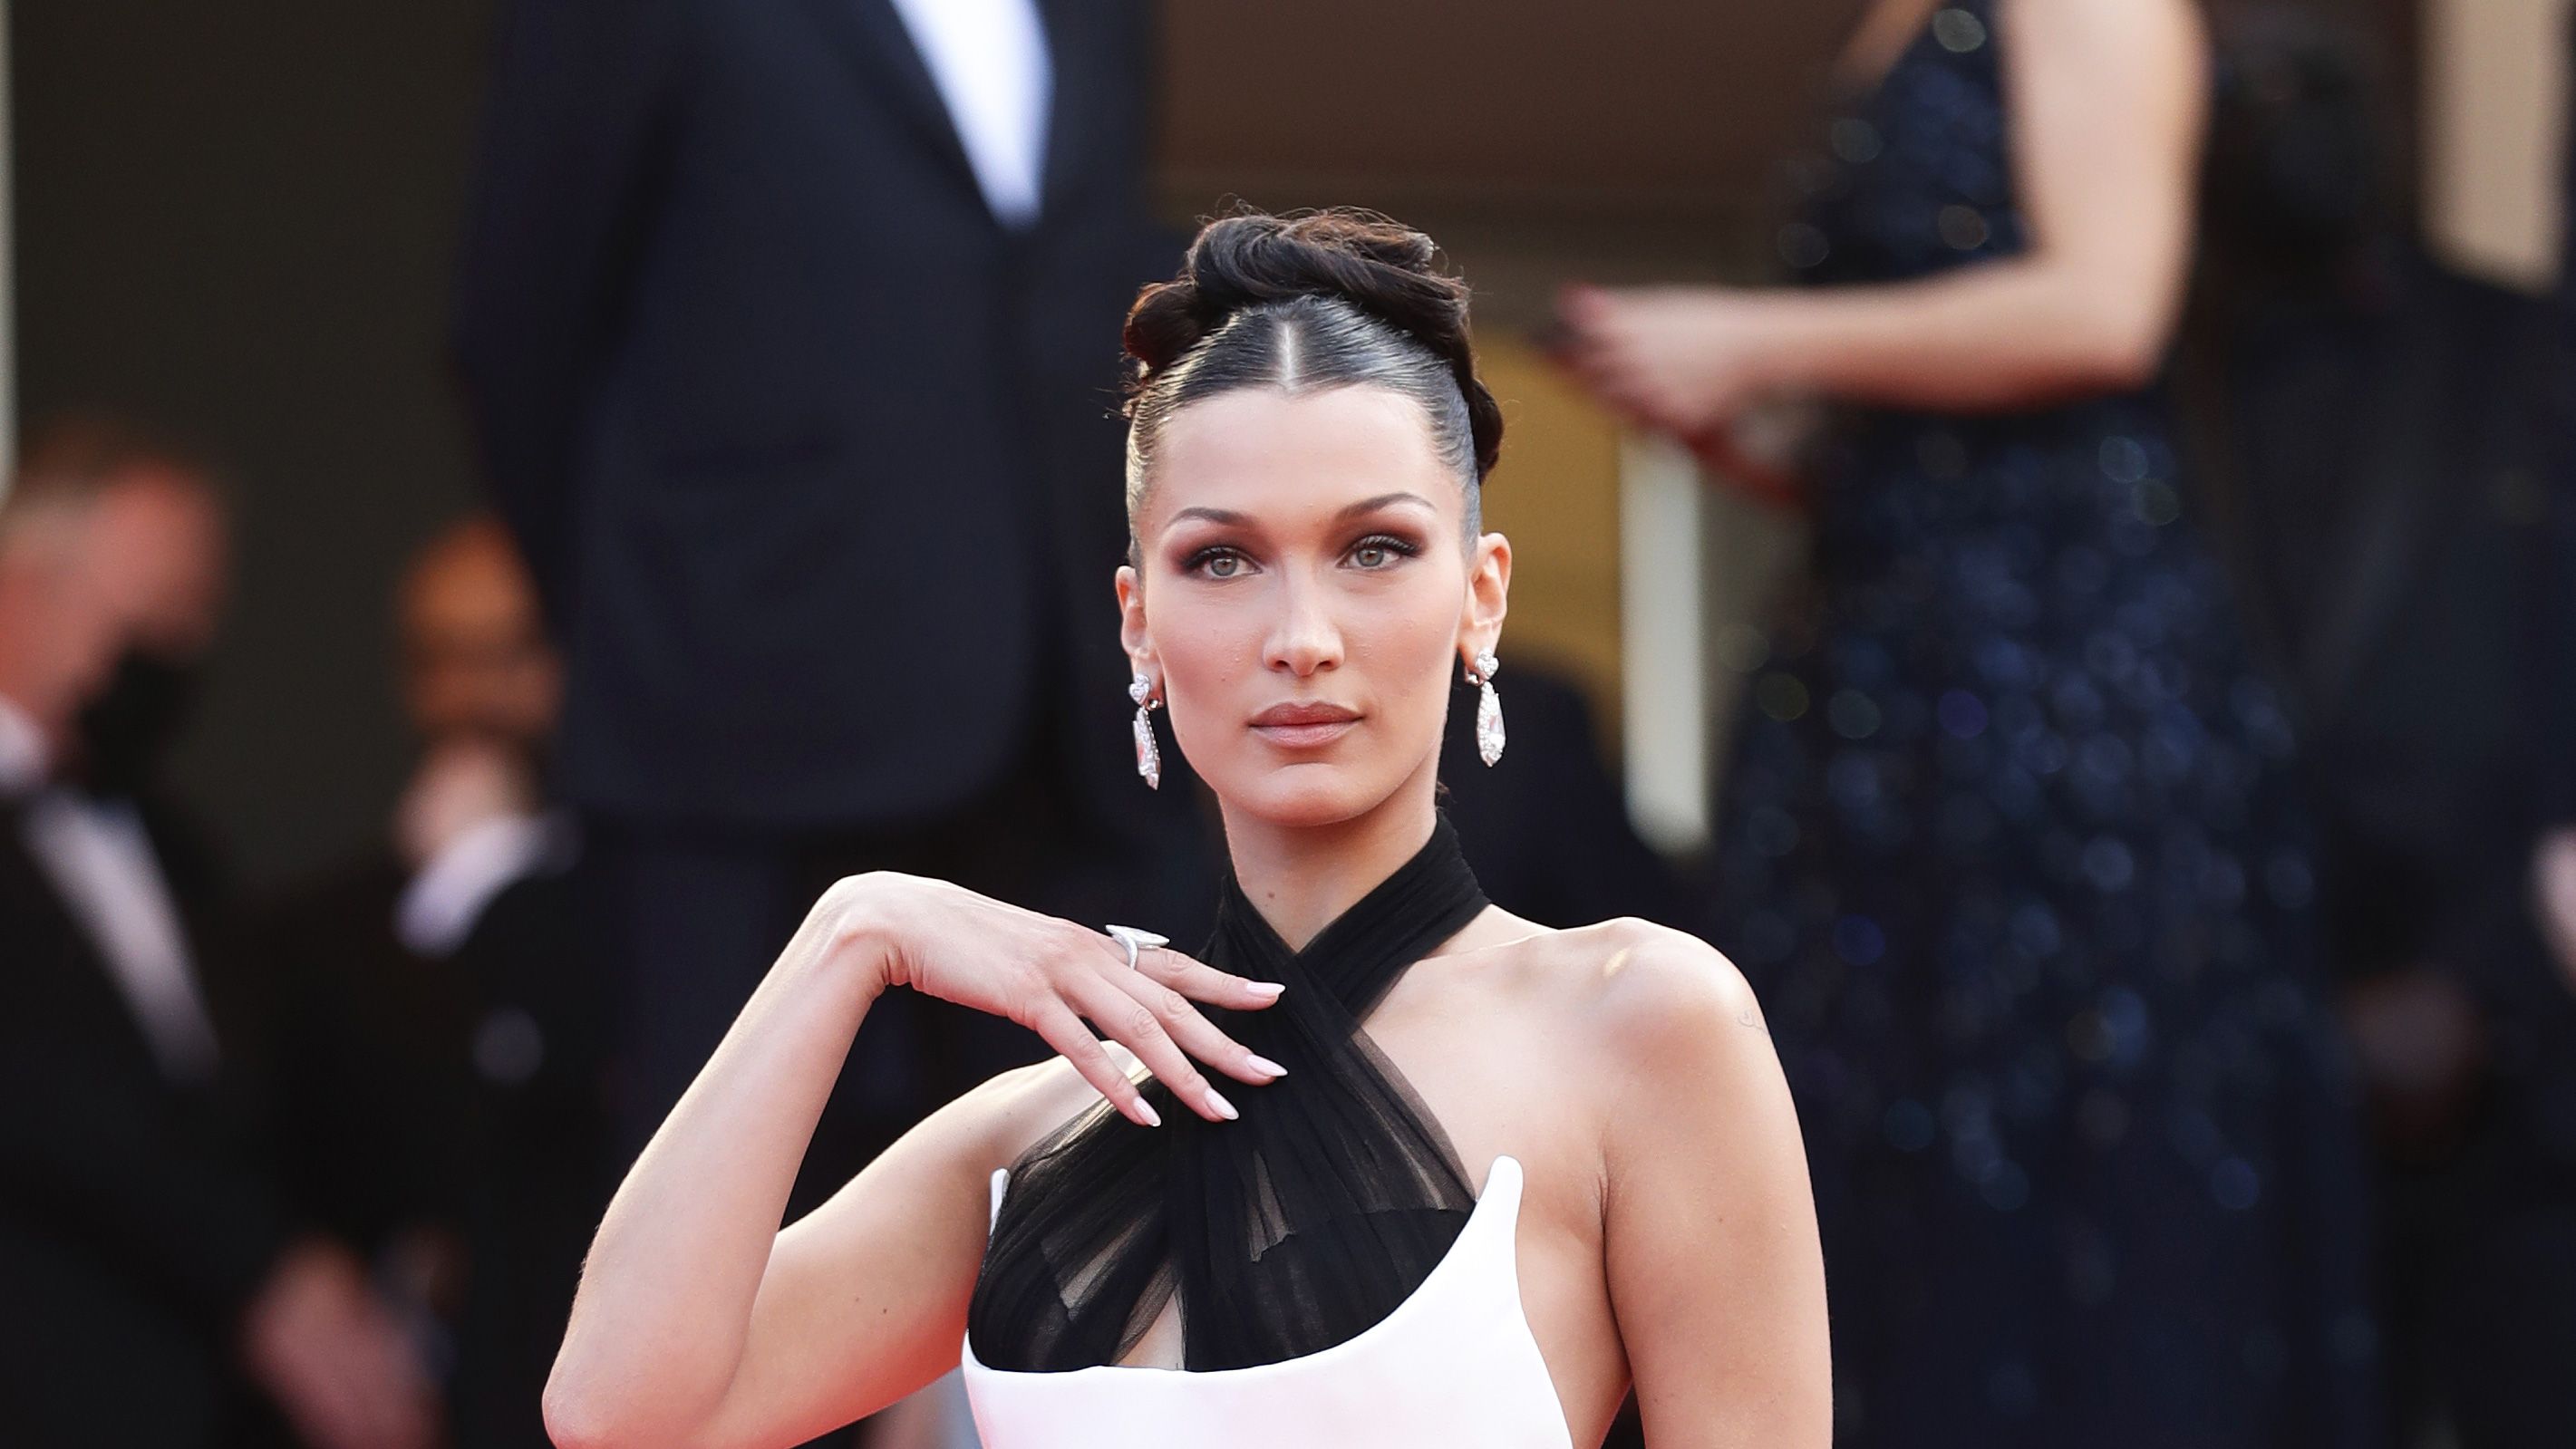 Bella Hadid Wears a Black and White Column Gown at Cannes Film